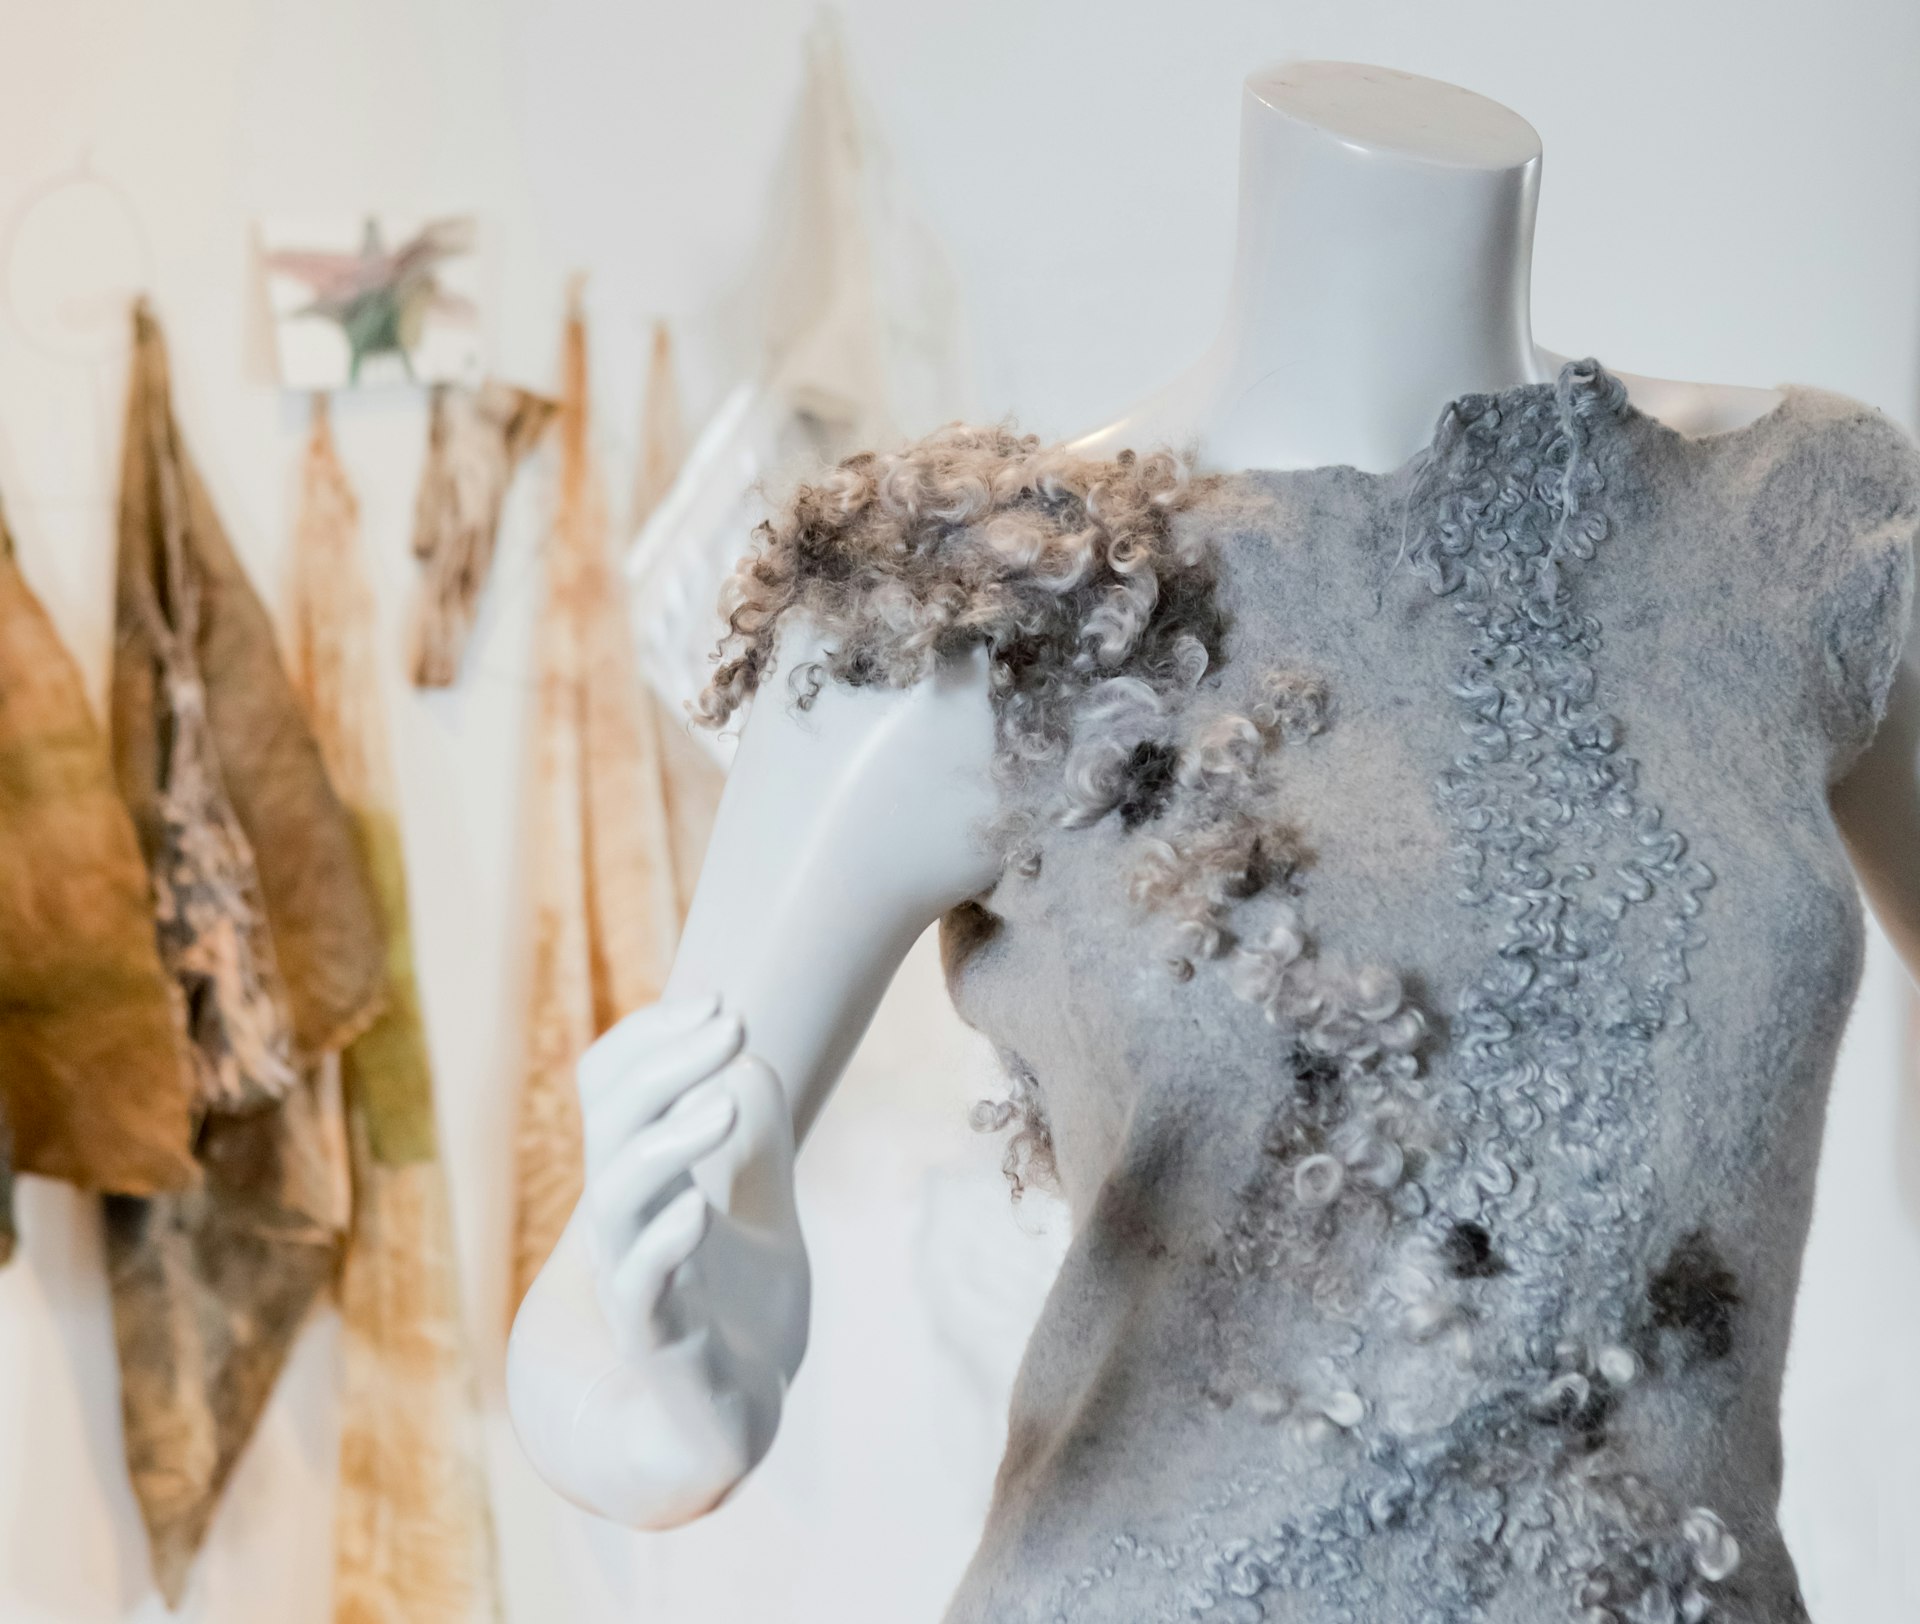 One of Celeste Malvar-Stewart's dresses shows the wide variety of colors and textures the come from working with natural wool. The dress is a soft grey with stream-like patches of curly or even fluffy, three-dimensional wool in browns, blacks, and deeper greys moving across the bodice